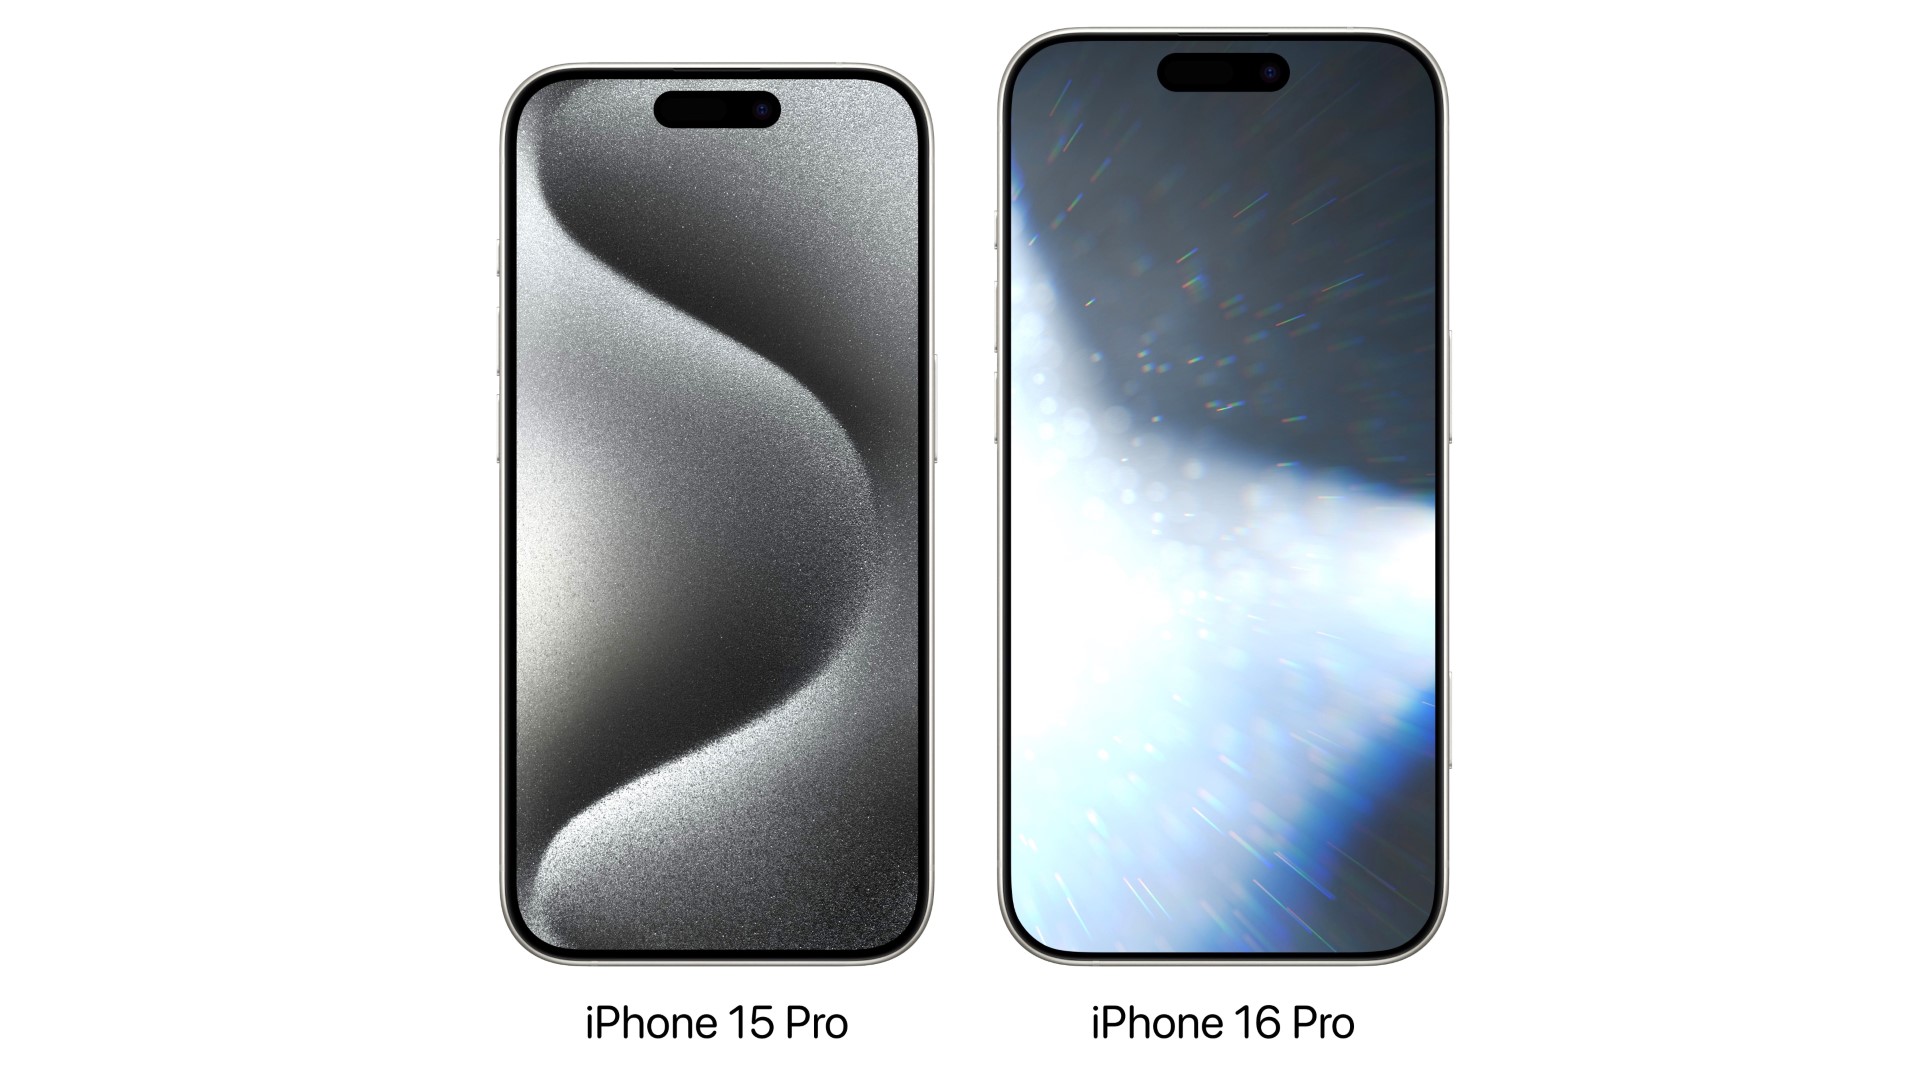 Apple Apple iphone 16 Professional: Not solely larger but additionally noticeably brighter exhibit anticipated